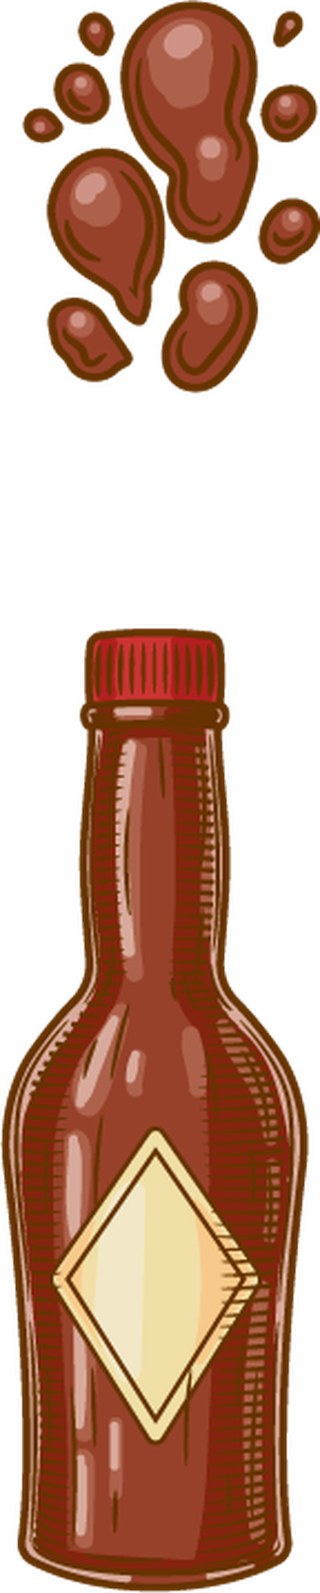 vectorillustration-engraving-style-different-sauces-are-poured-from-bottles-973964